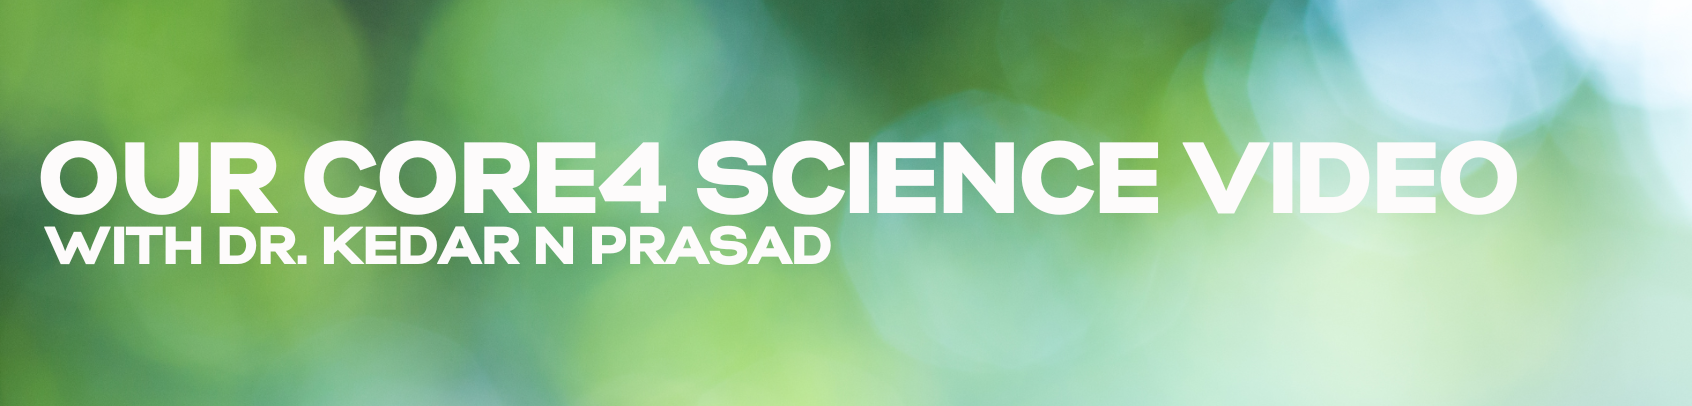 Introducing Our Core4 Science Video with Dr. Kedar N Prasad